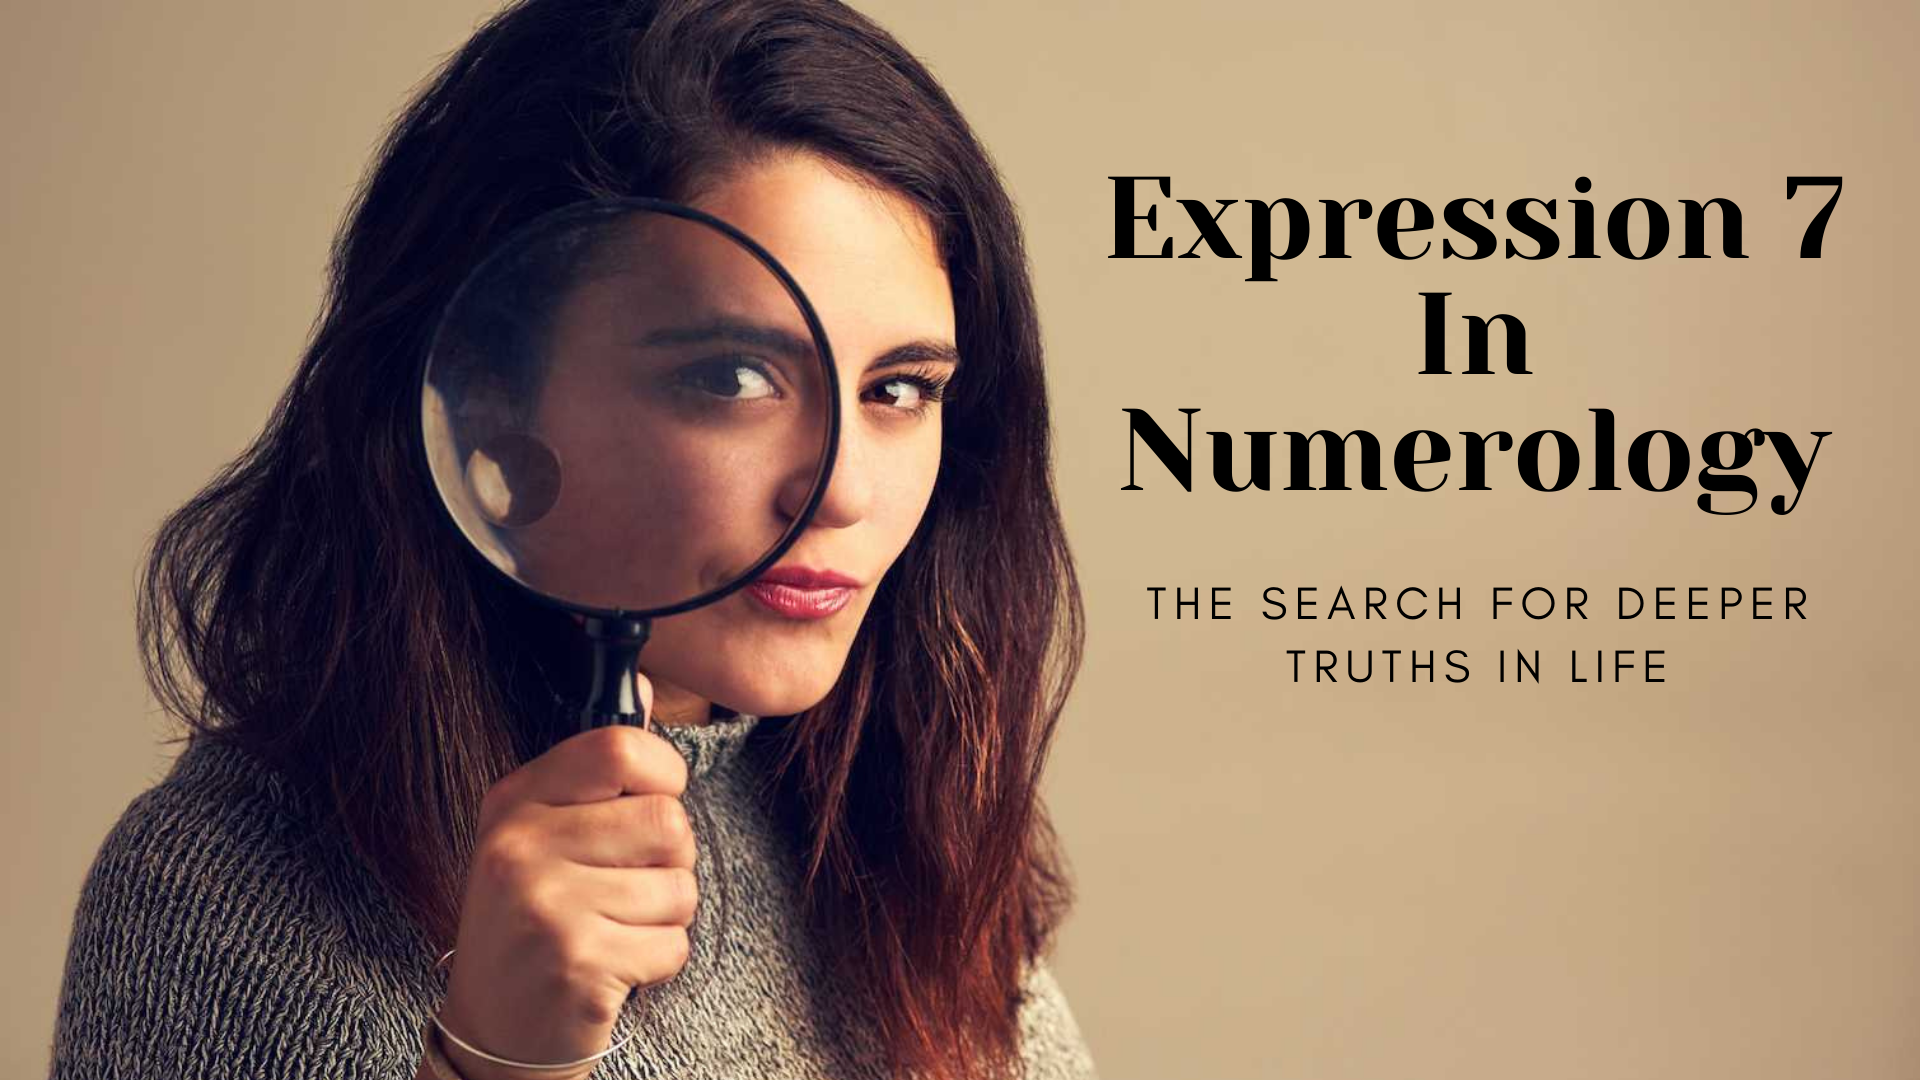 Expression 7 In Numerology - The Search For Deeper Truths In Life